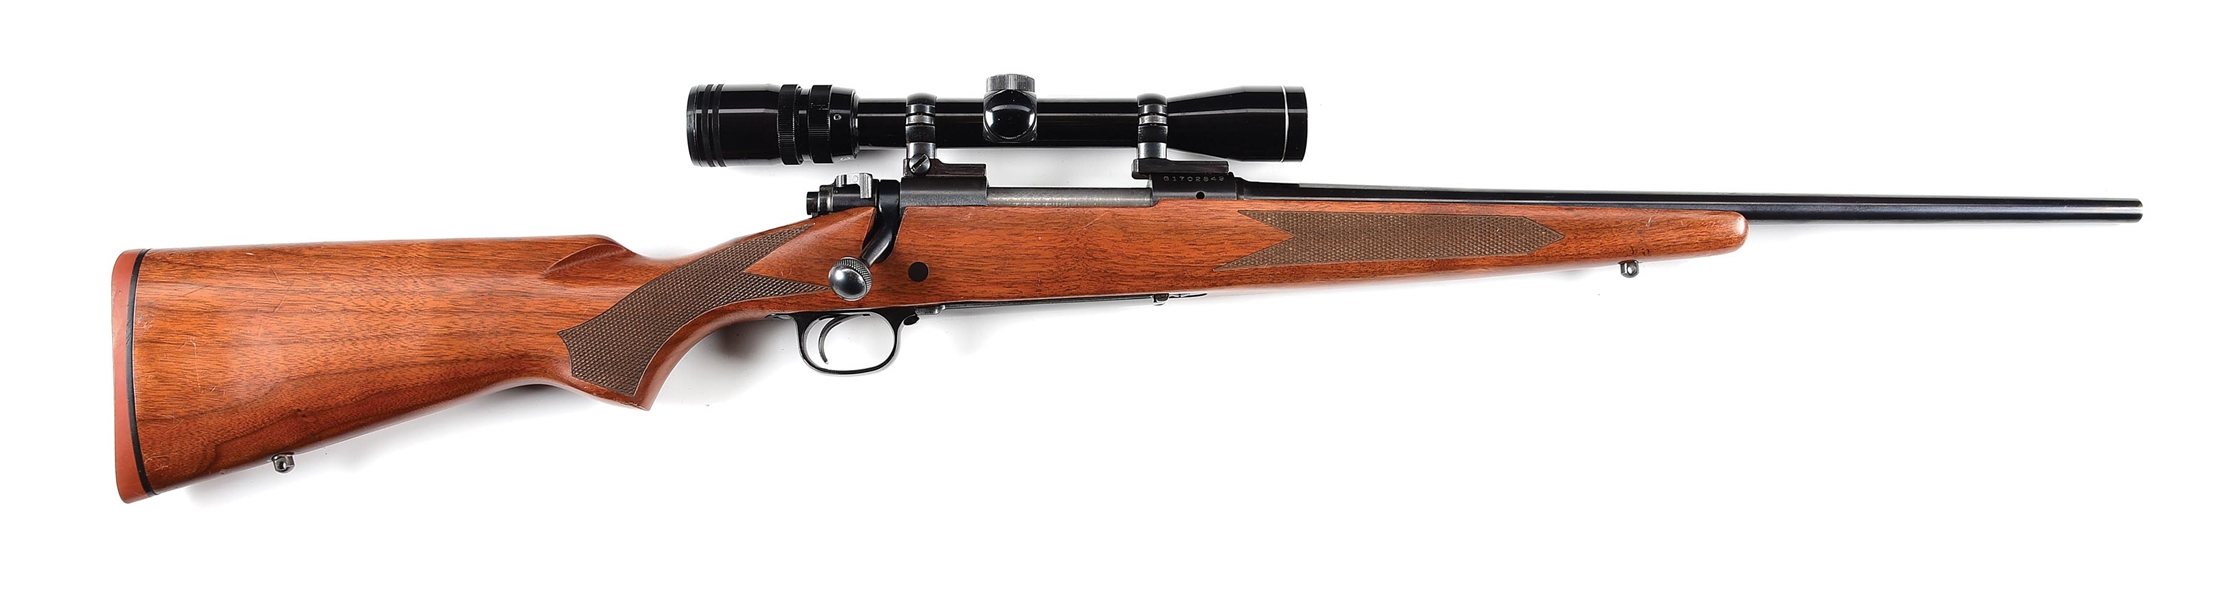 (M) WINCHESTER MODEL 70 .30-06 SPRINGFIELD BOLT ACTION RIFLE WITH TASCO SCOPE.